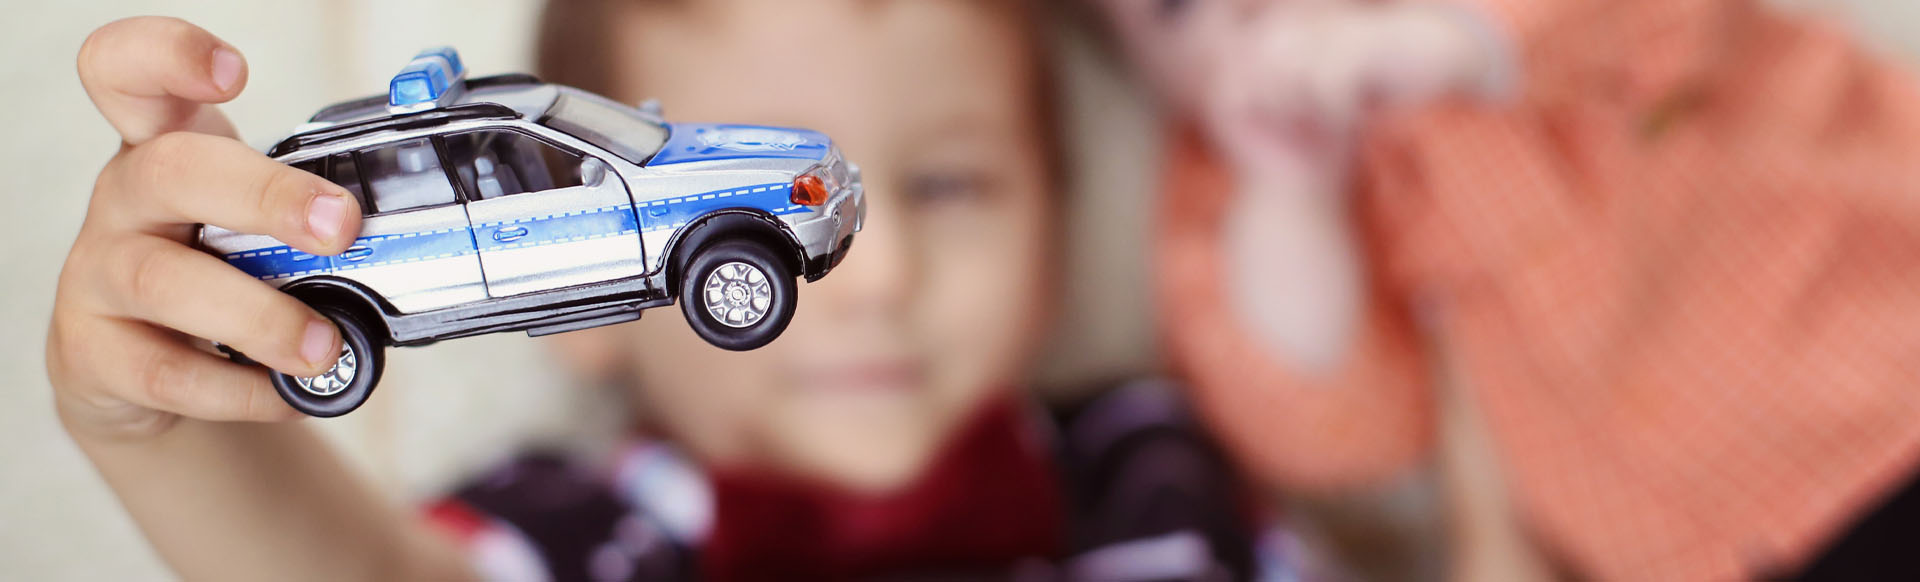 Image showing two small children kids looking at a toy police car that one of them is holding up